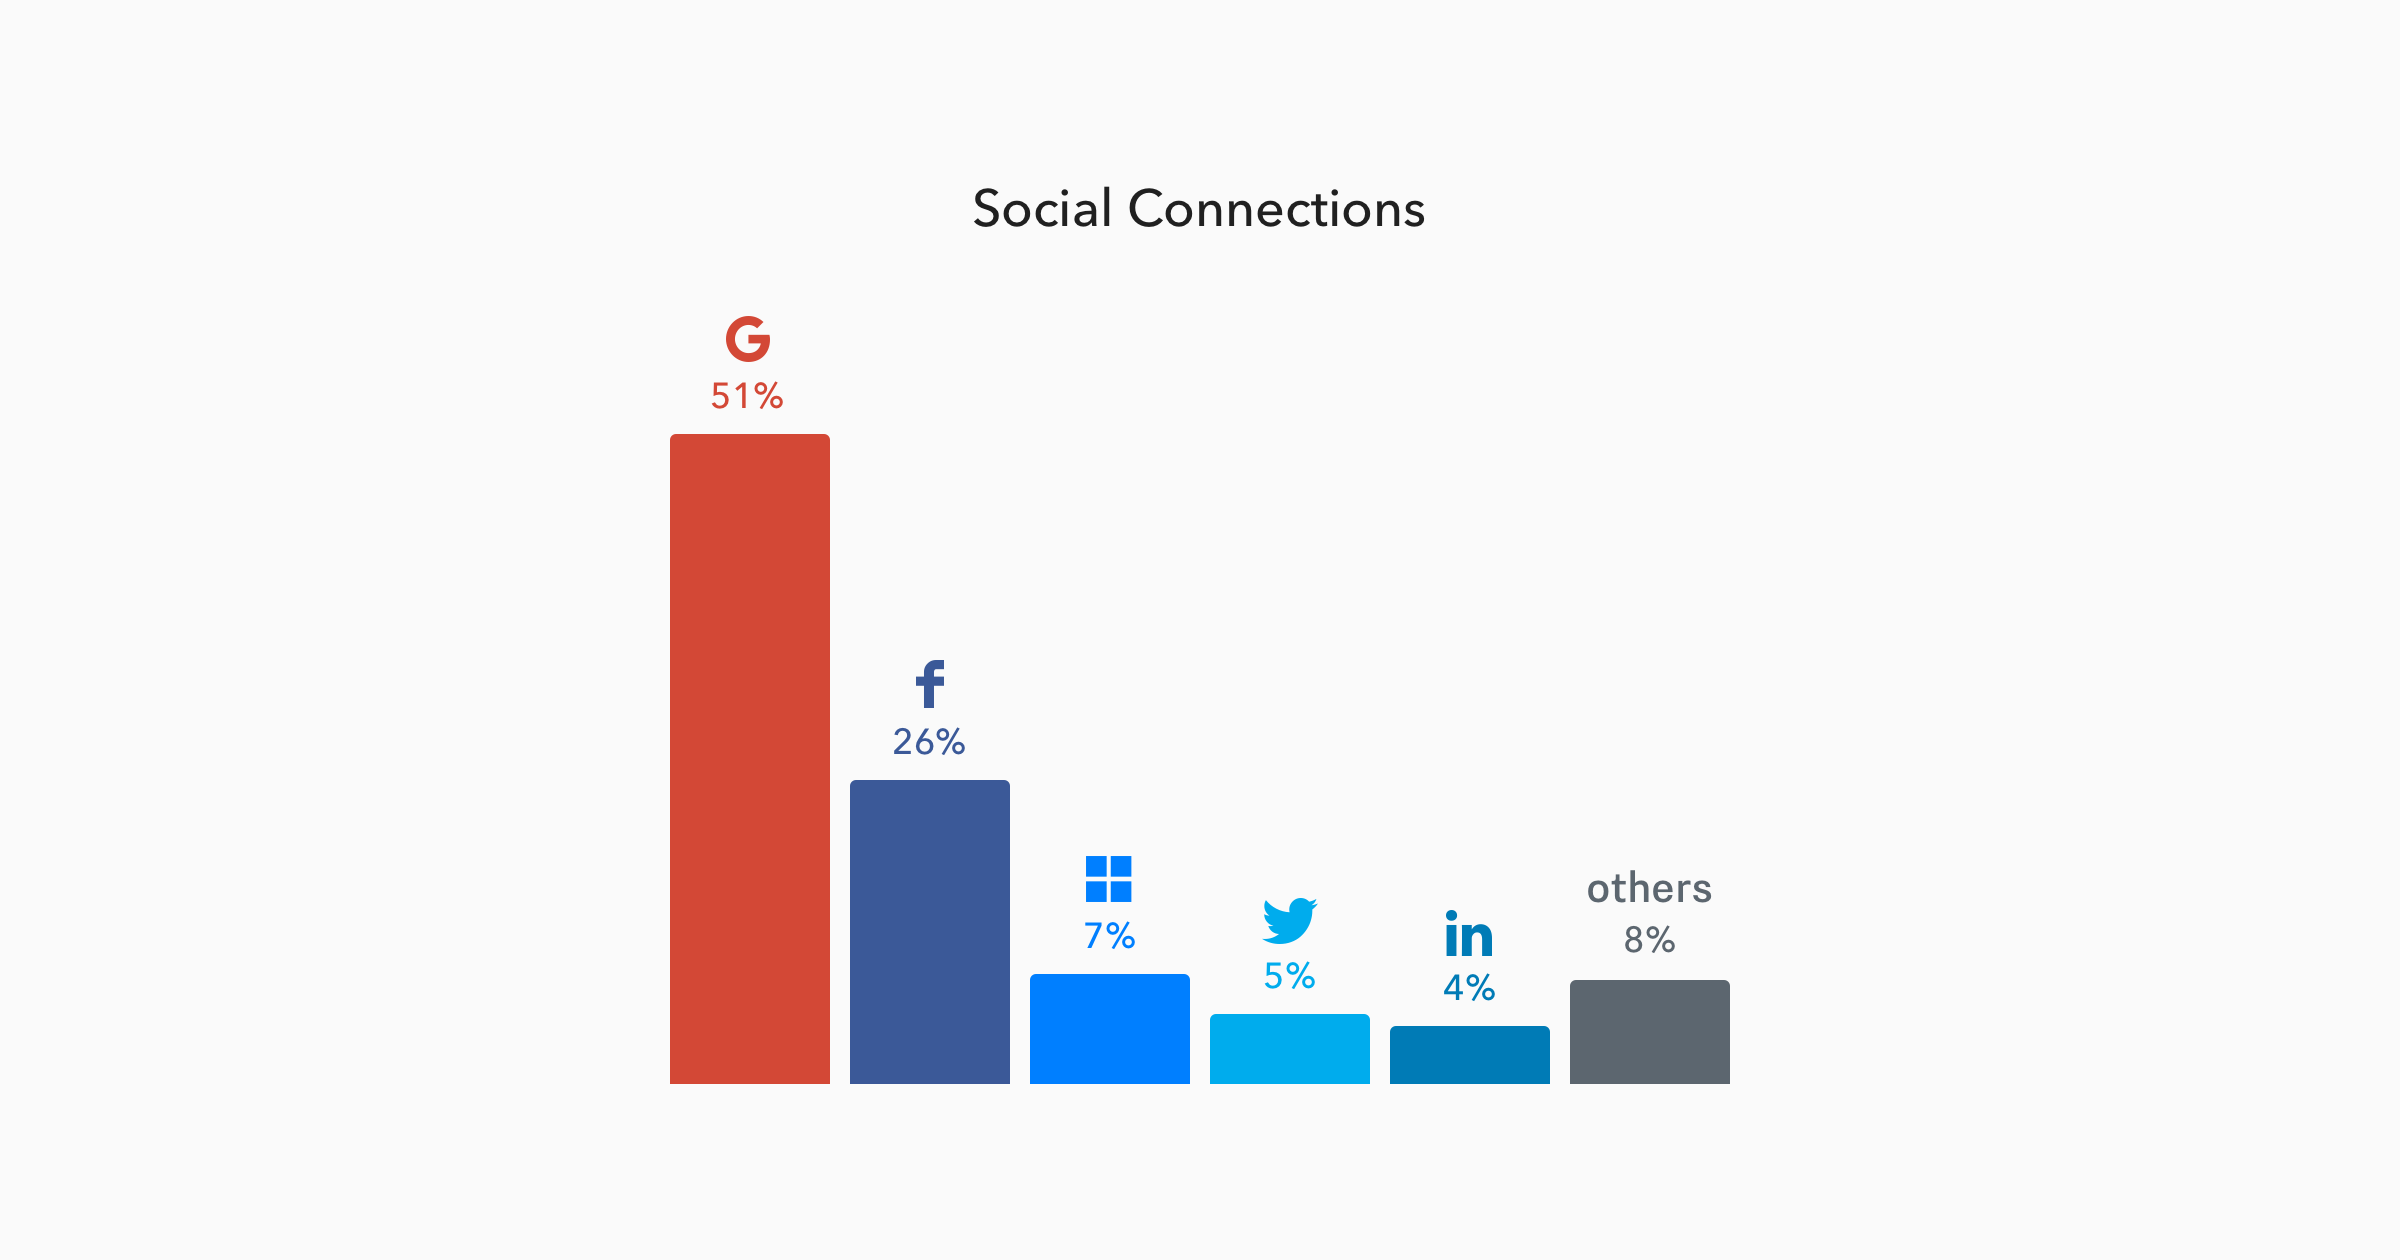 Social connections share per provider